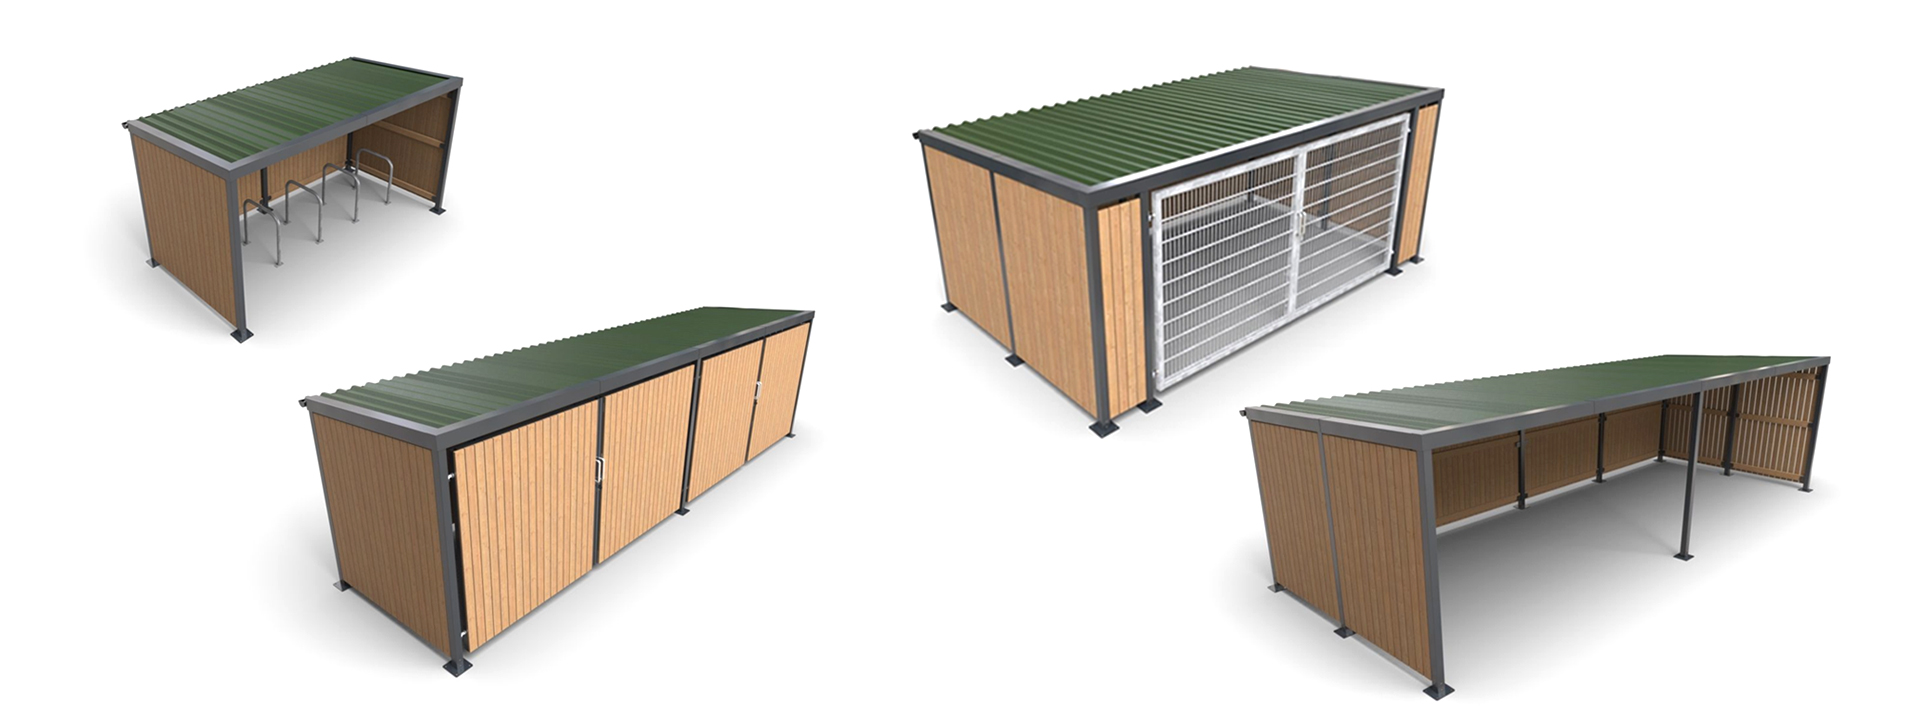 Our New Refined Deacon Shelter Range